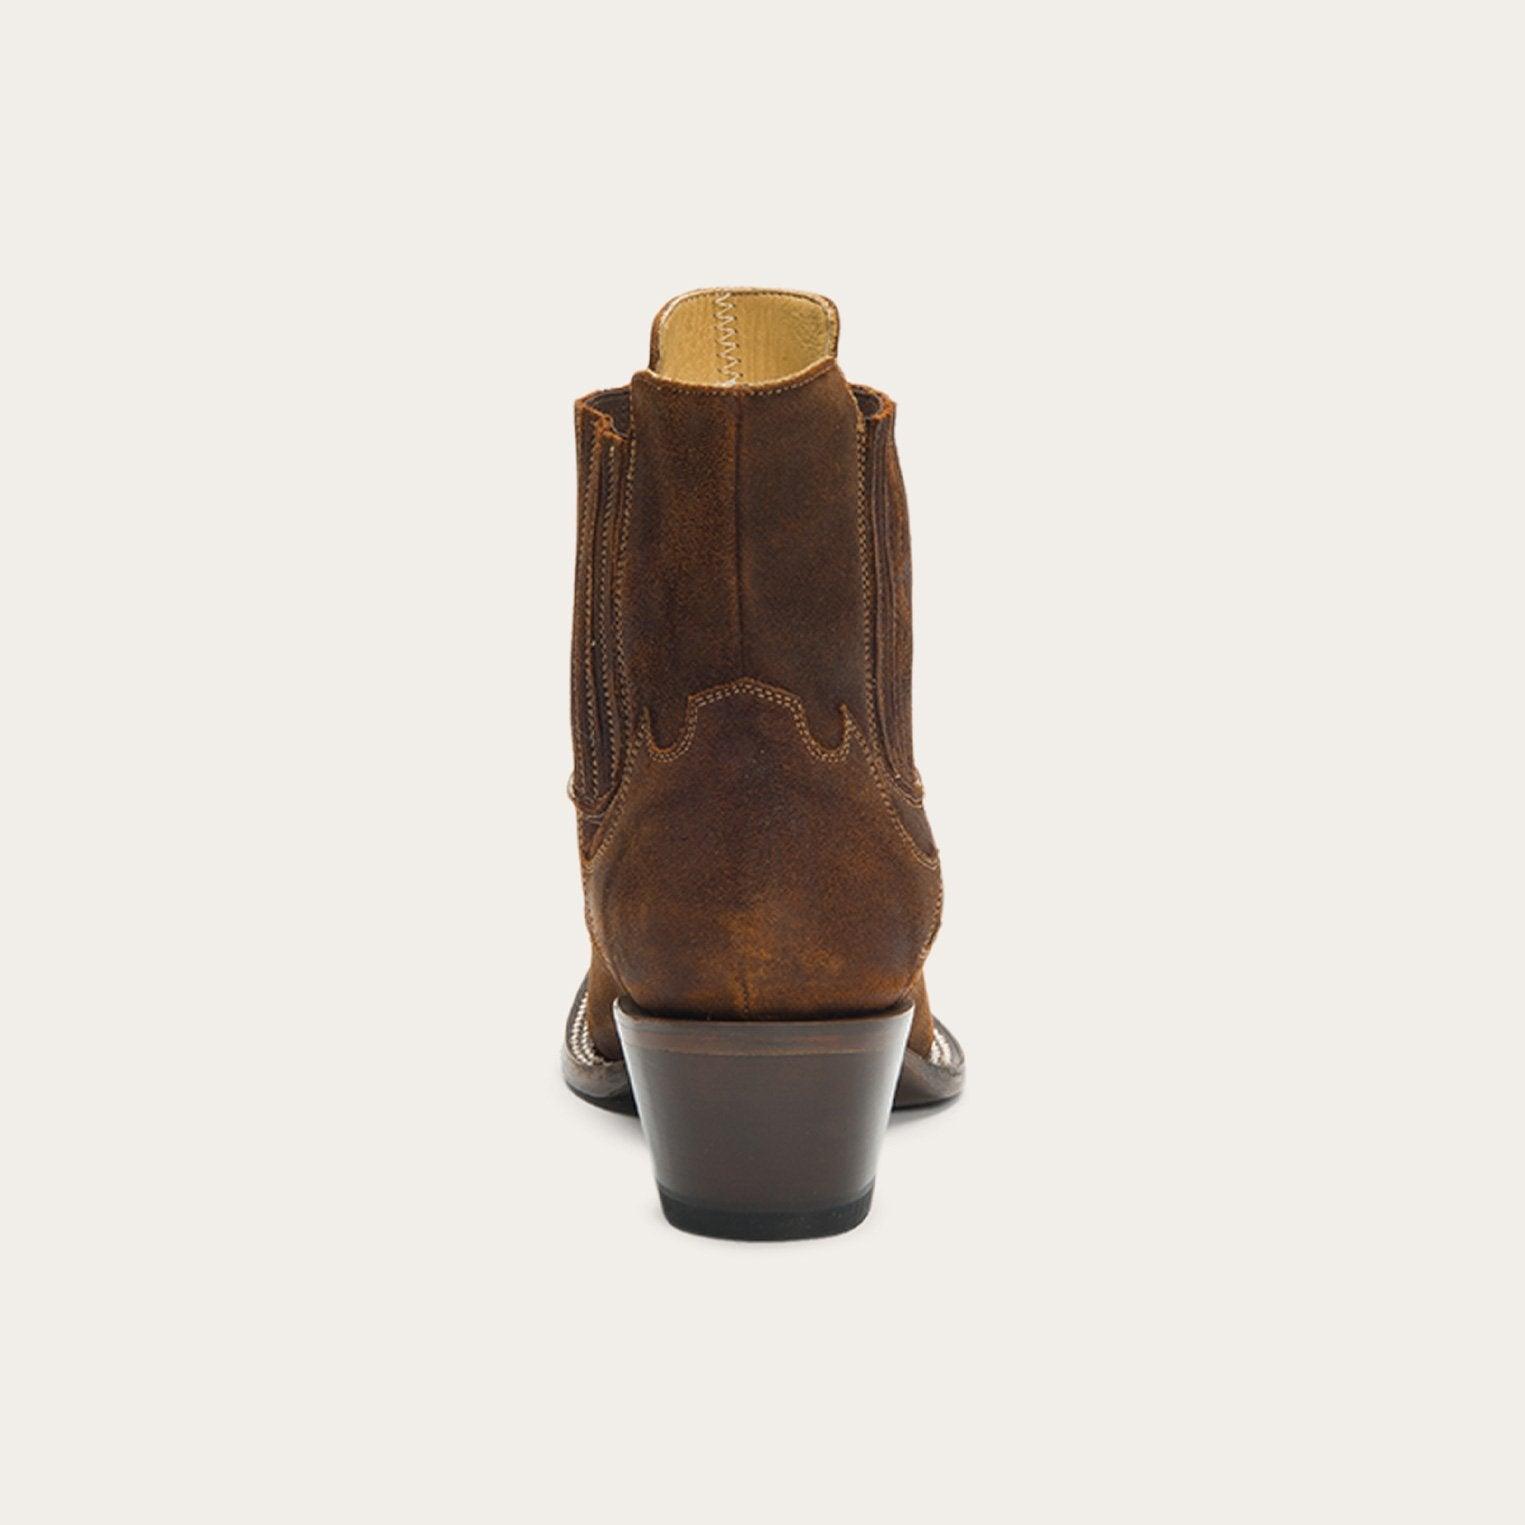 Stetson Kaia Boots - Flyclothing LLC